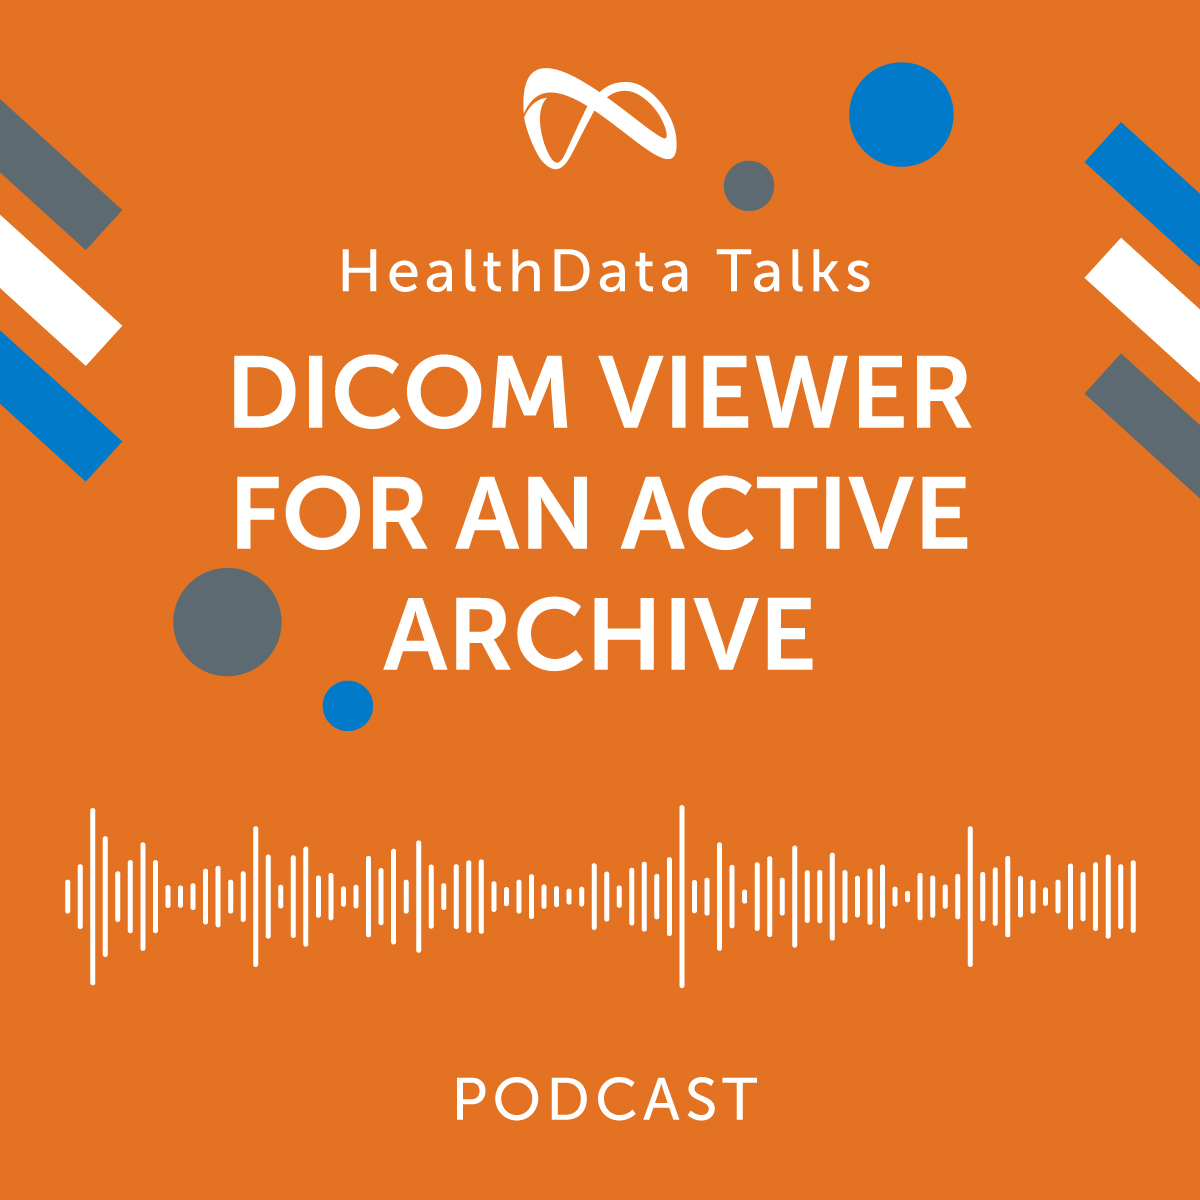 DICOM Viewer for an Active Archive